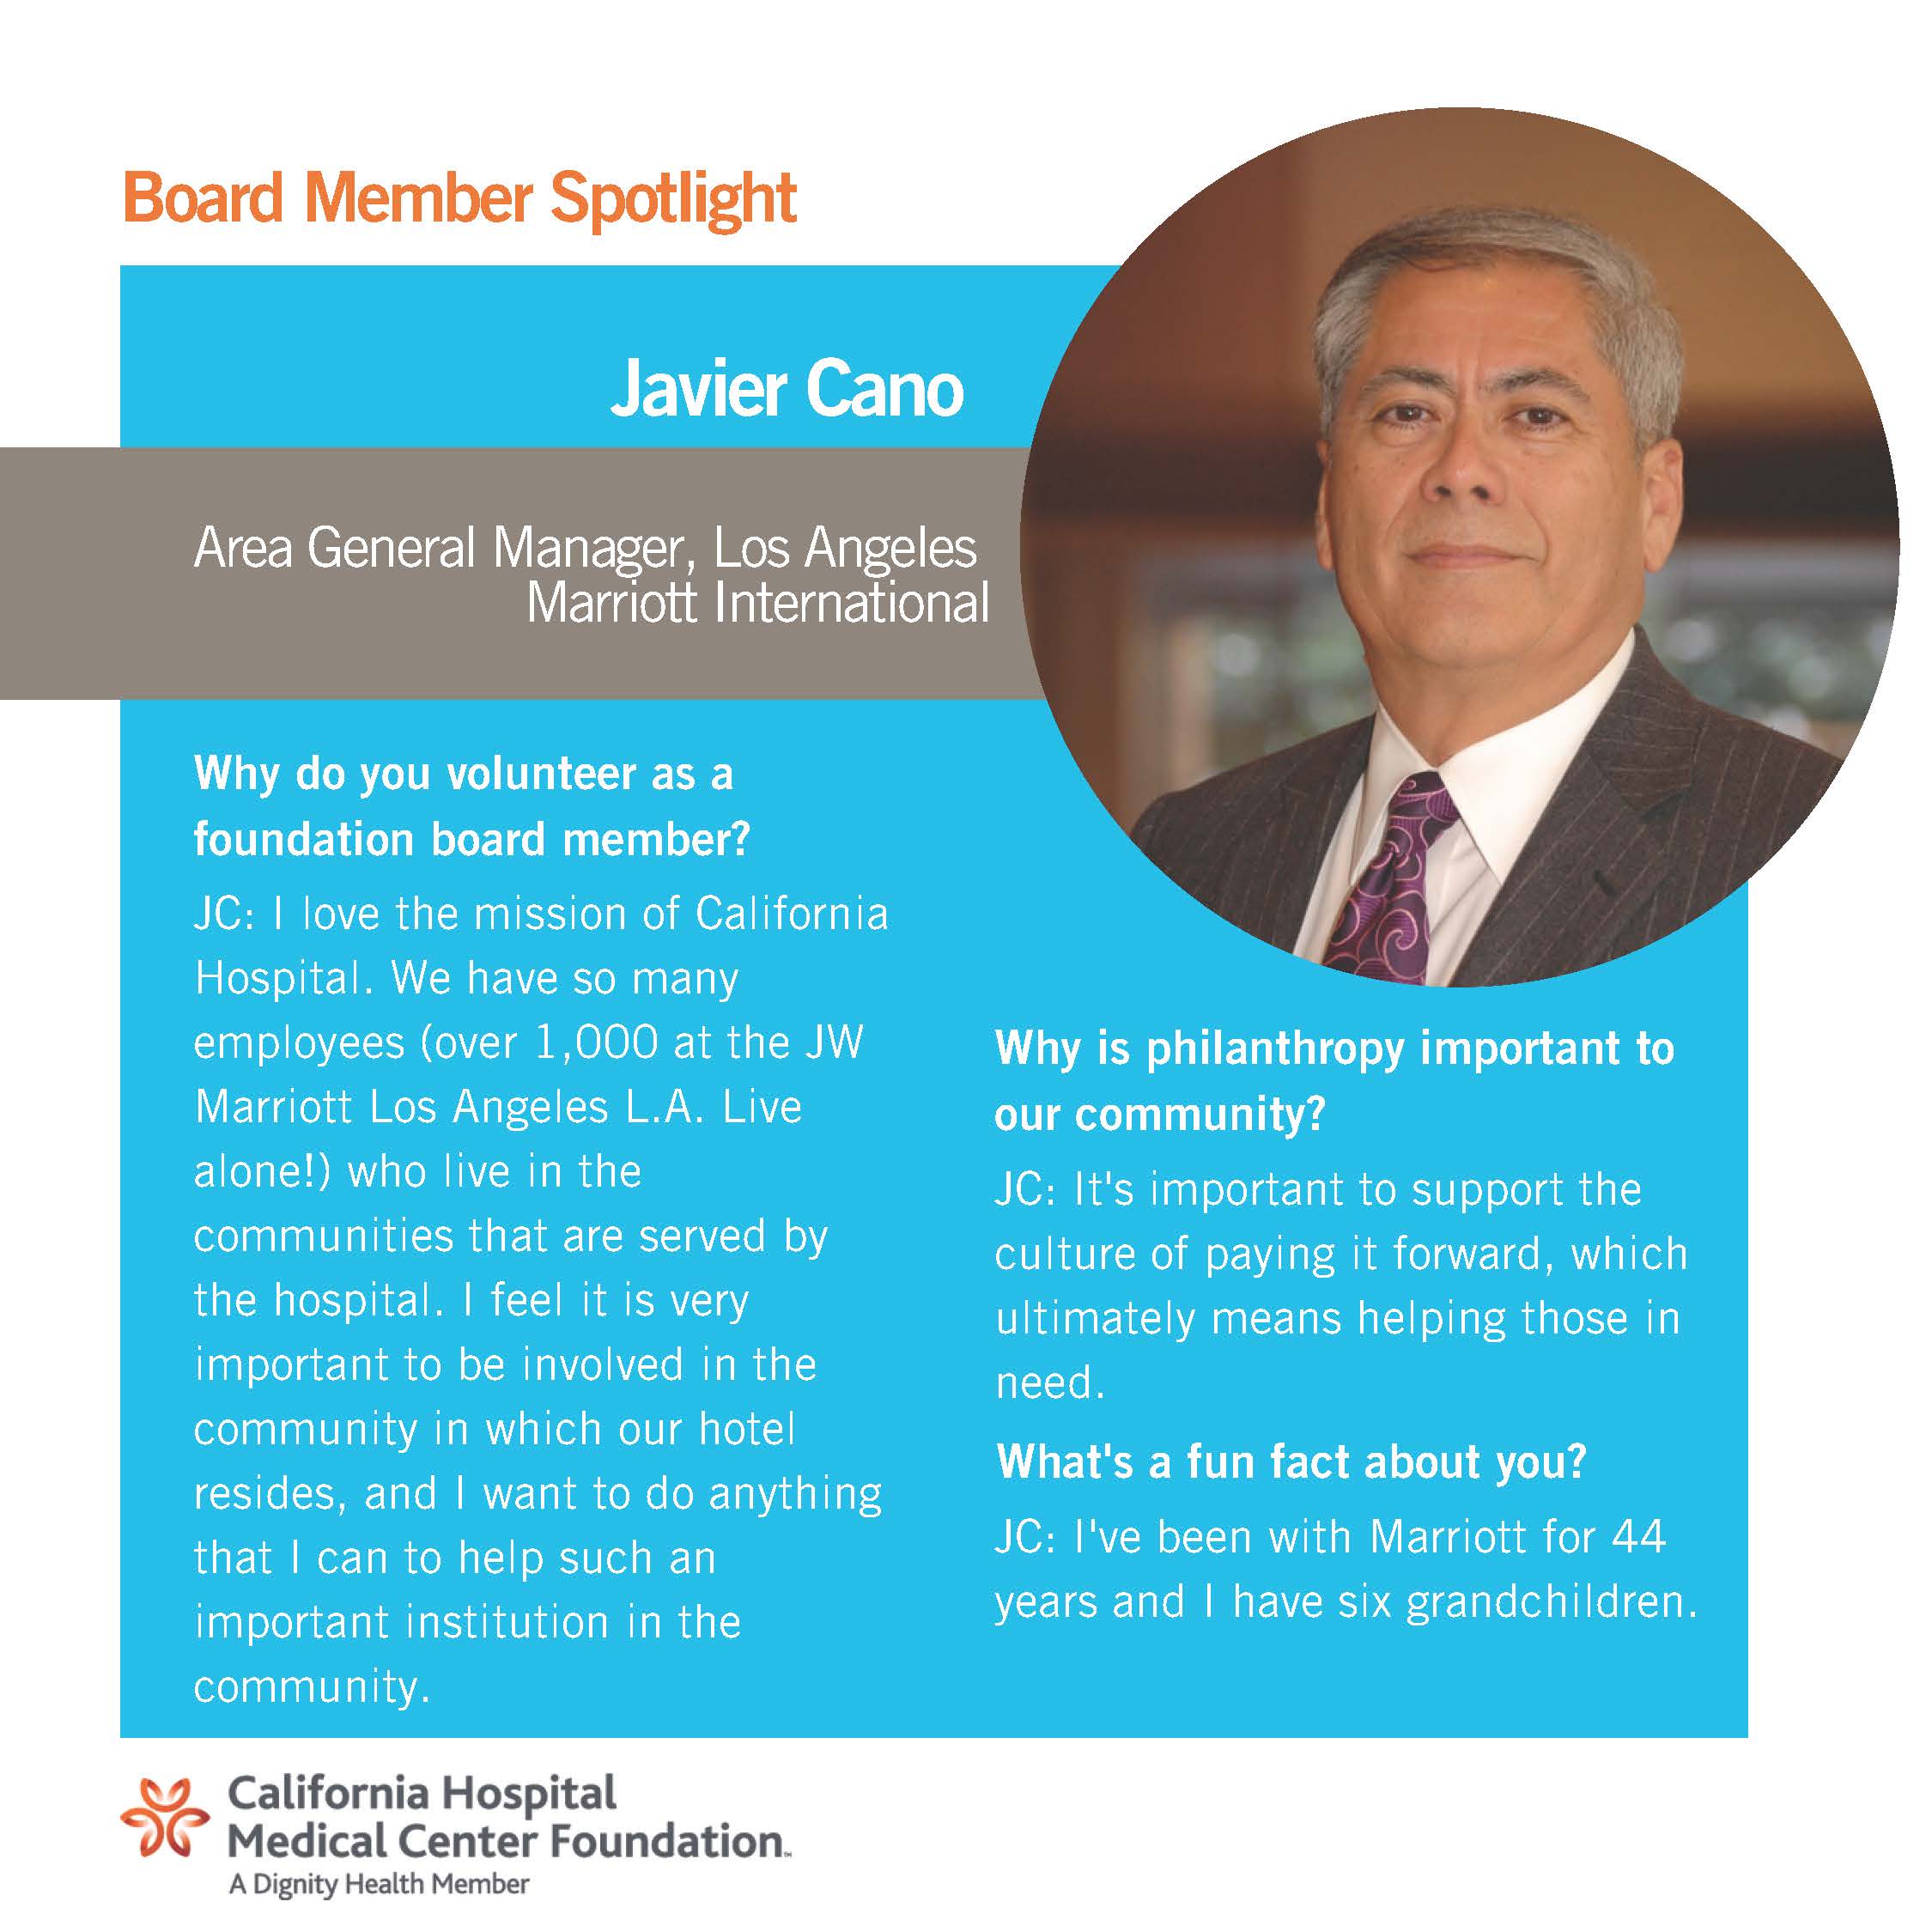 Image of Javier Cano